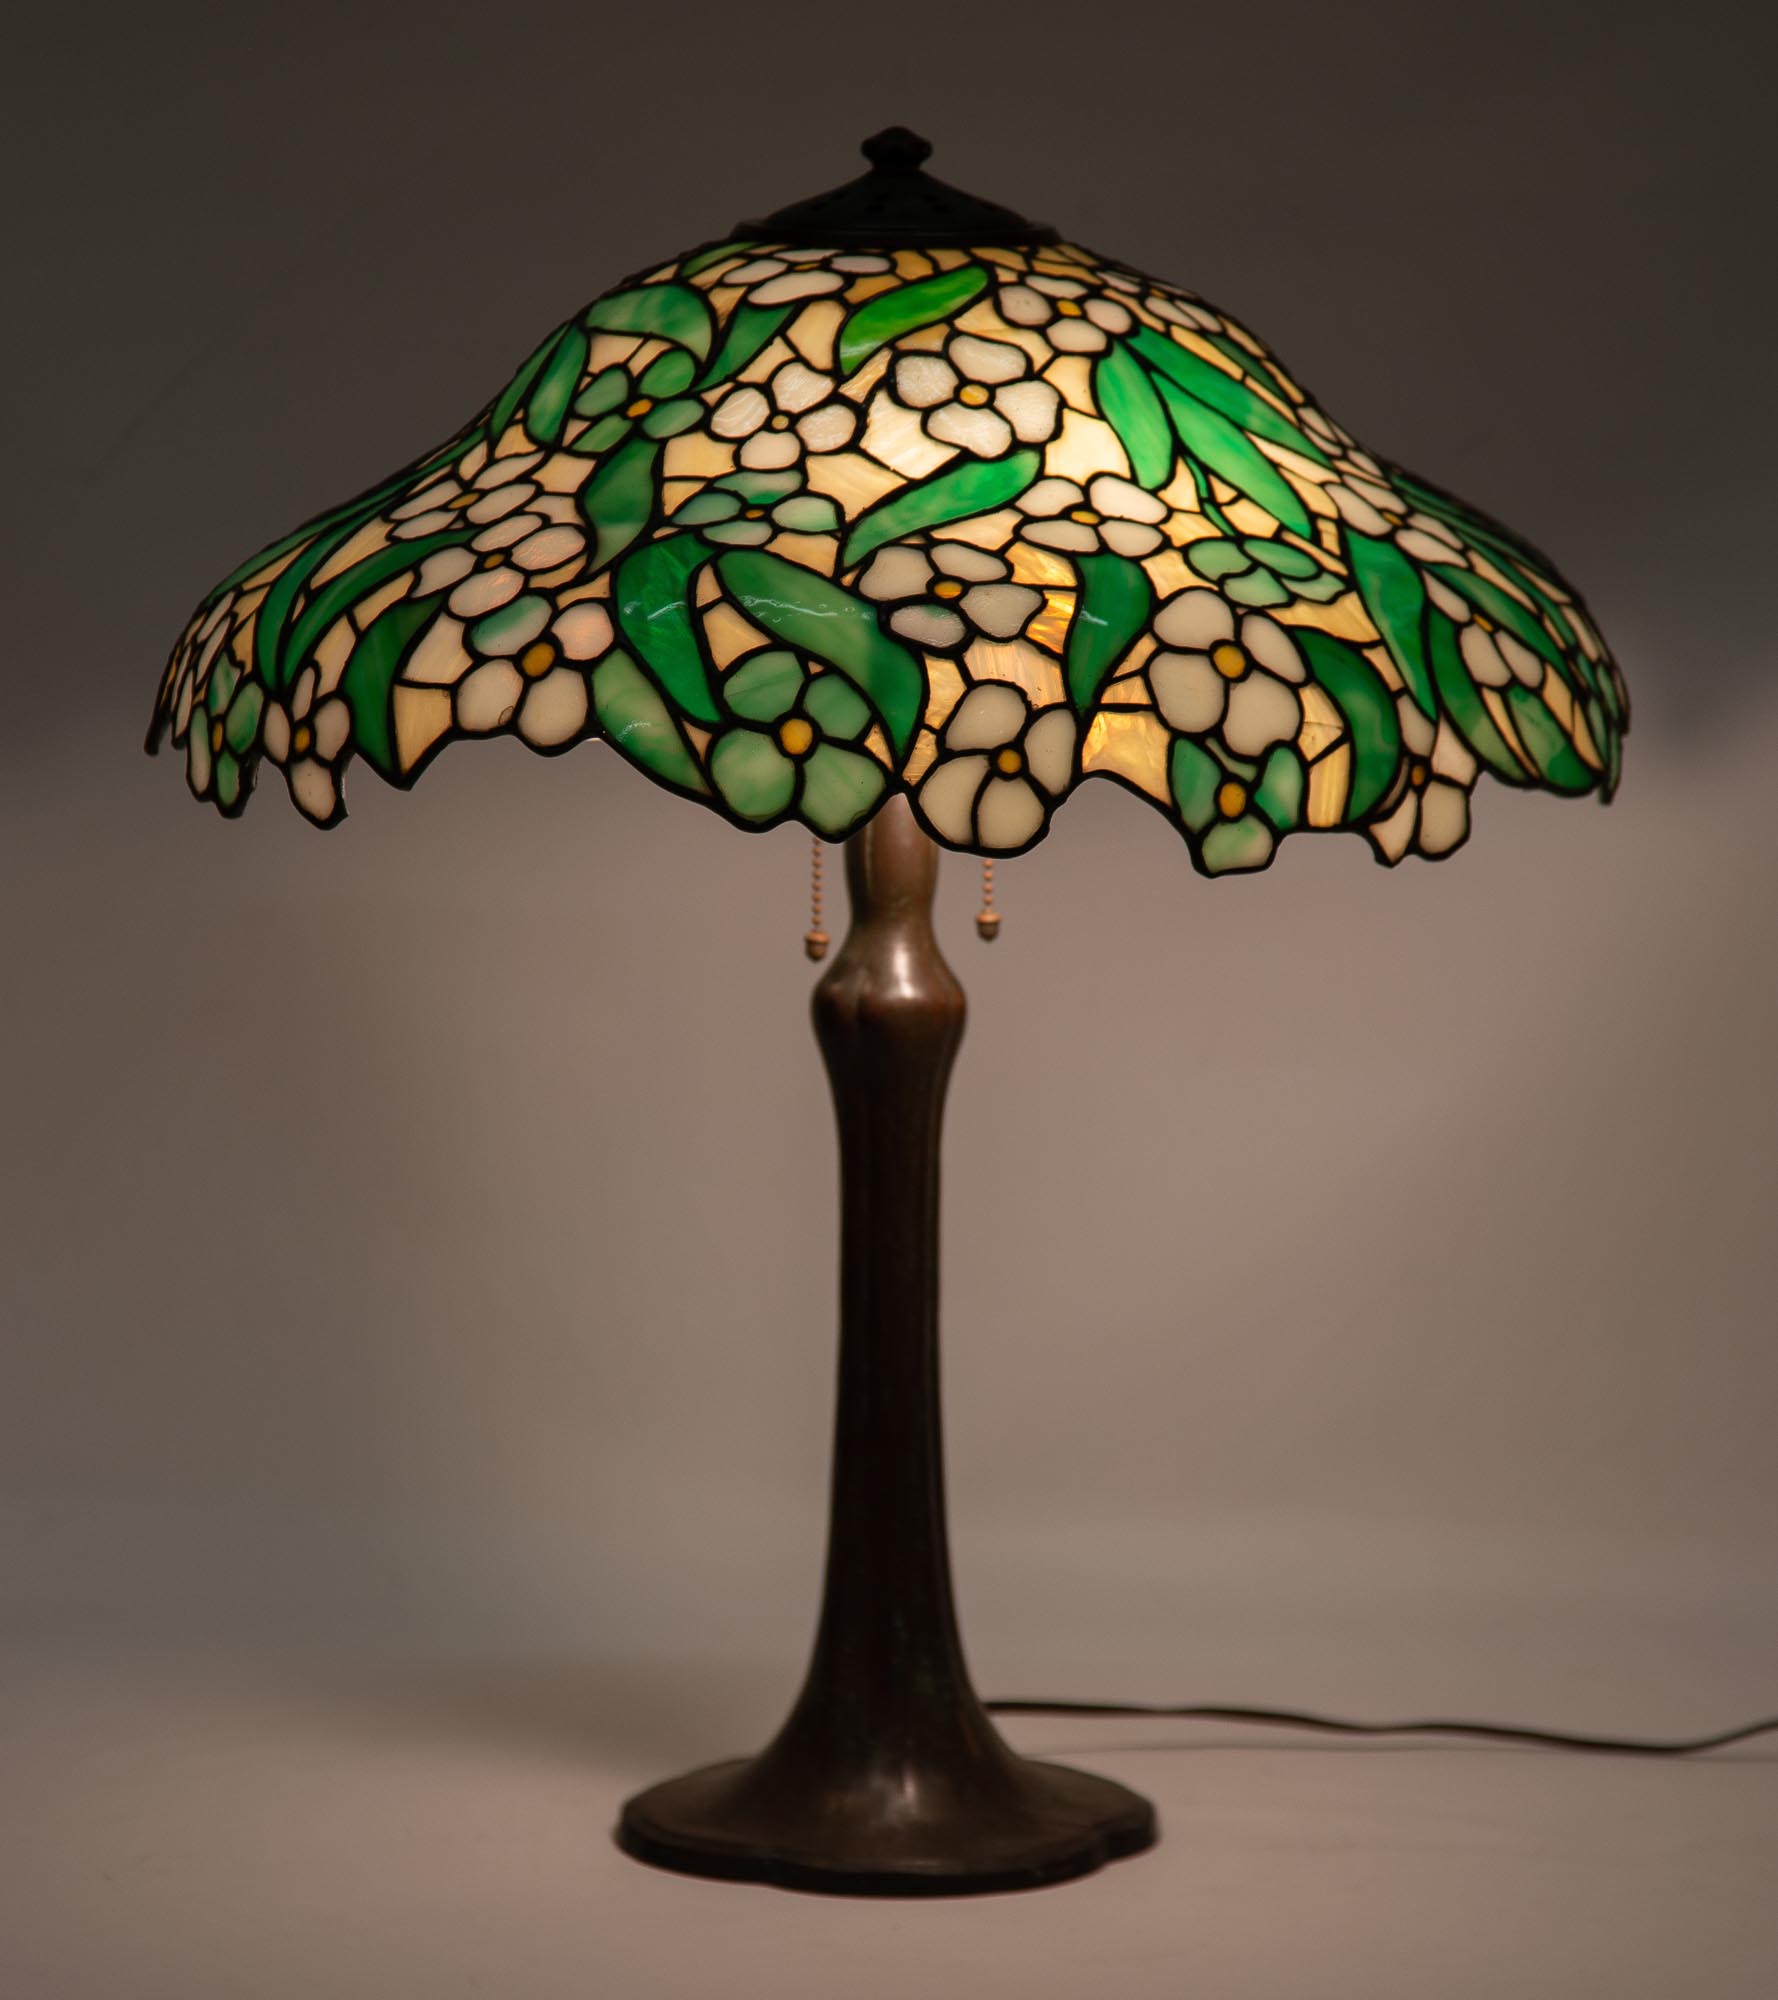 Handel Signed Base and Shade Leaded Table Lamp. Apple blossom decoration. Early 20th century. - Image 2 of 2